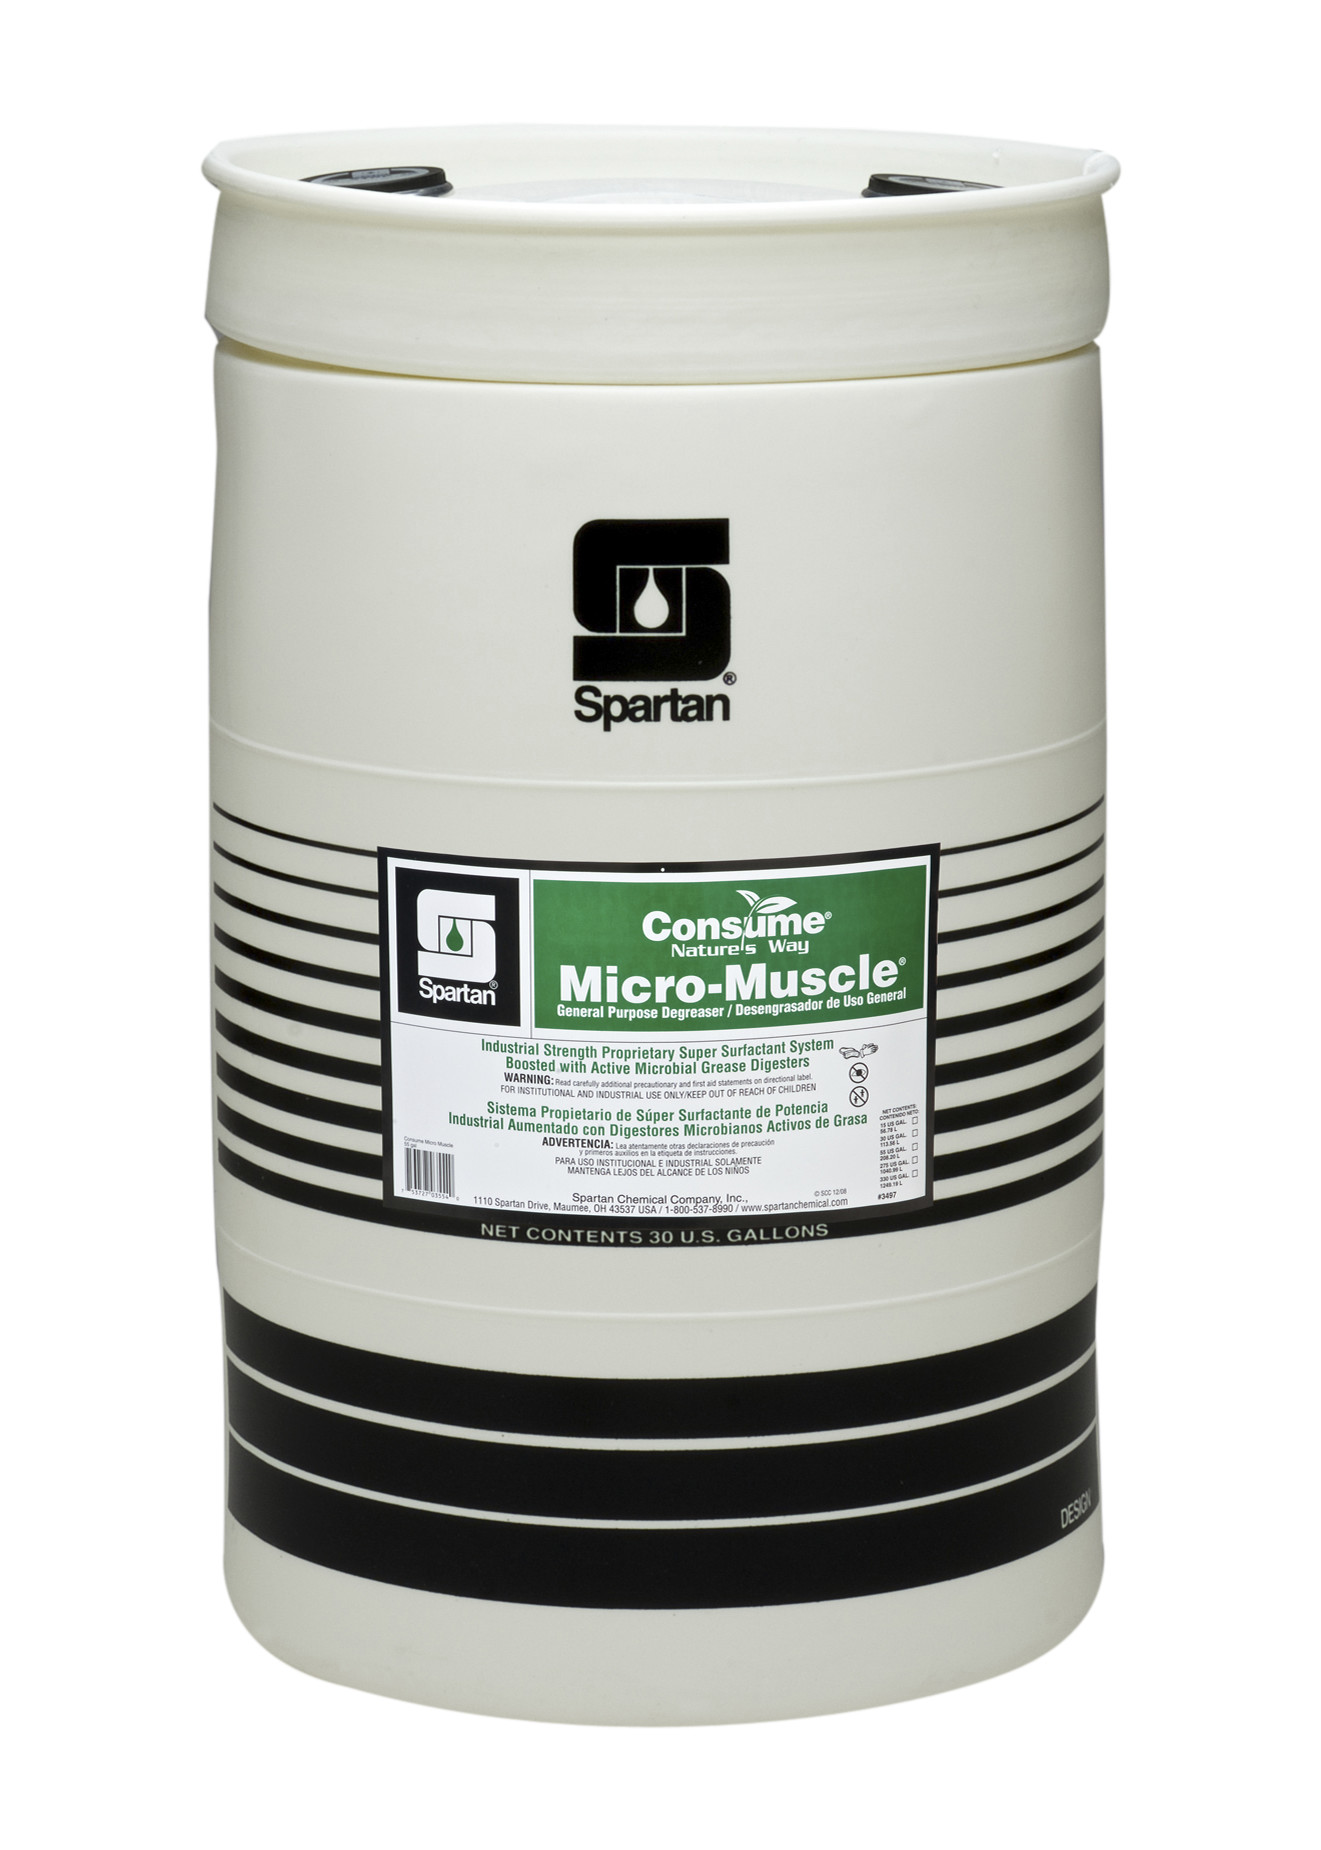 Spartan Chemical Company Consume Micro-Muscle, 30 GAL DRUM